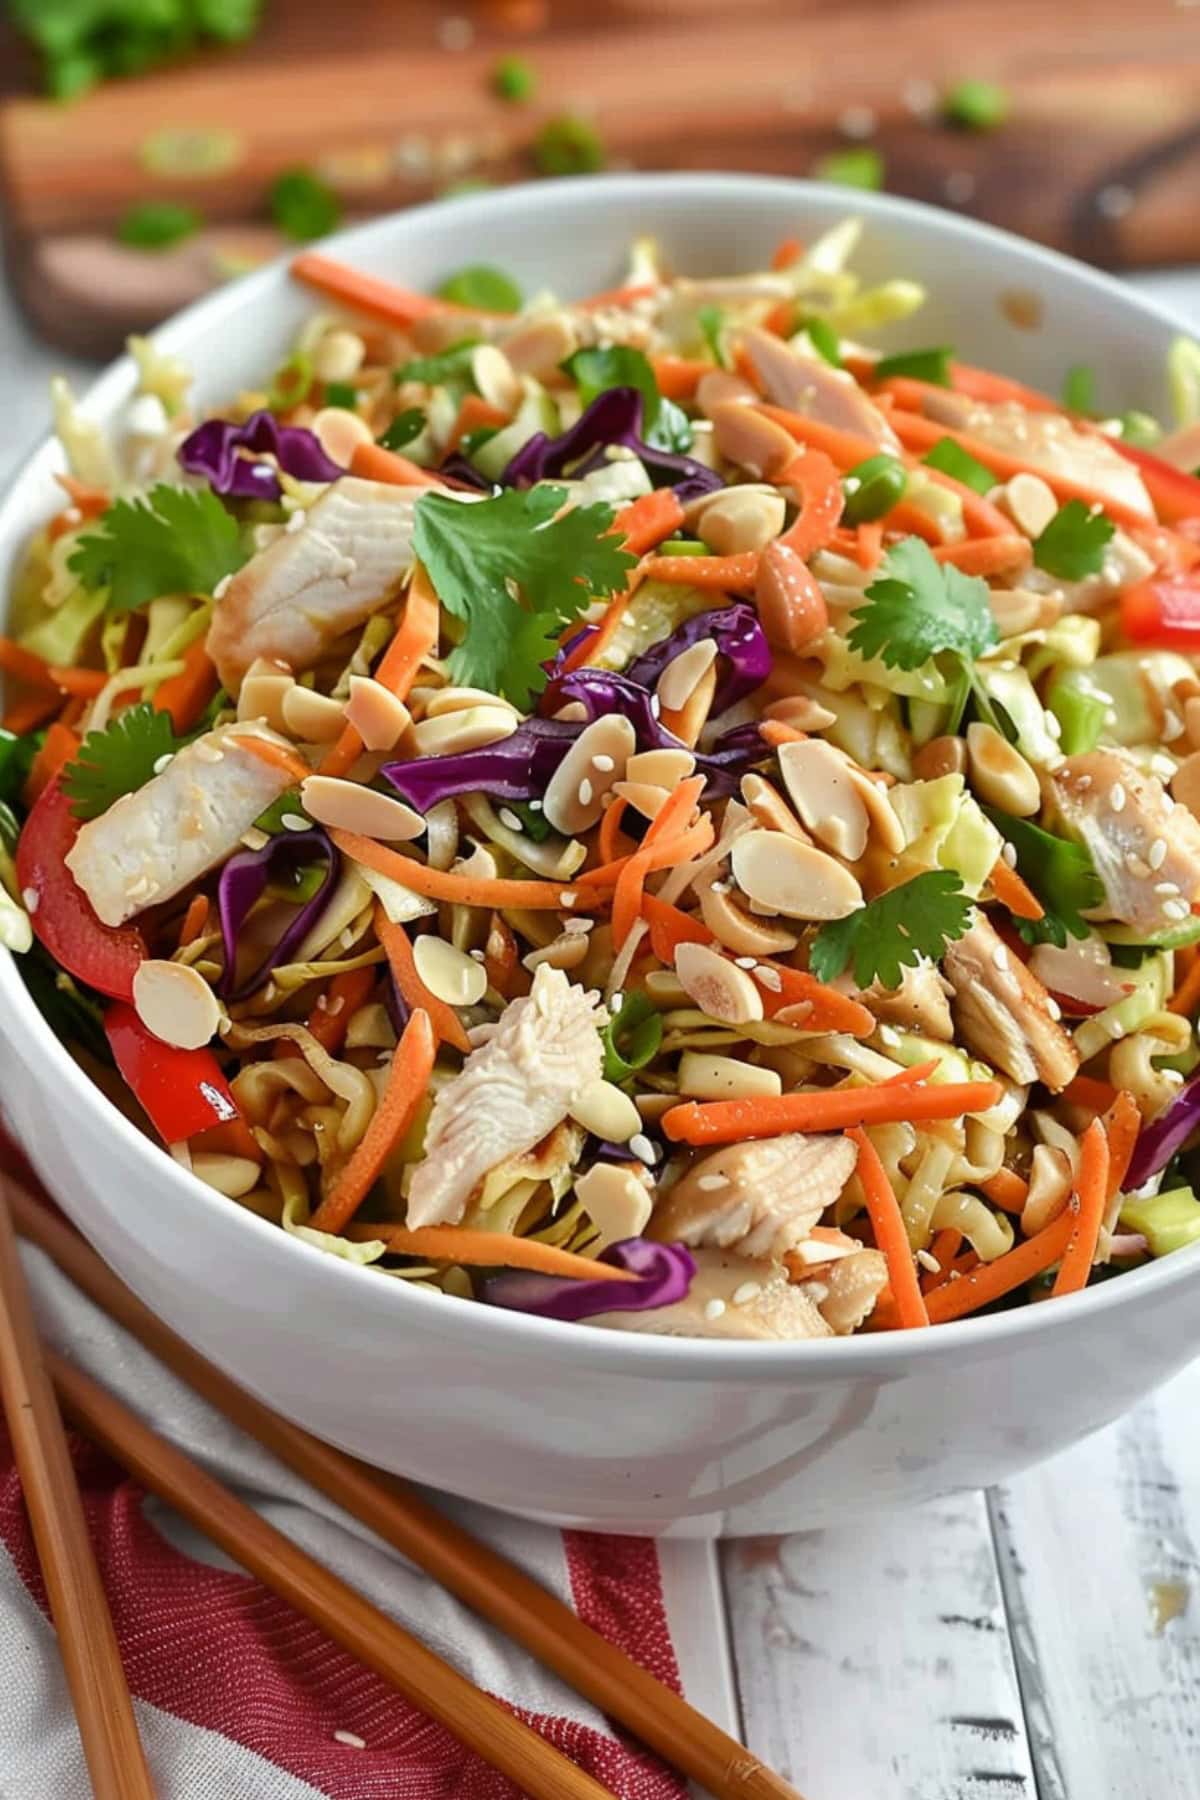 Salad made of chow mien noodles, almond slices, carrots, bell peppers, napa cabbage and cilantro.